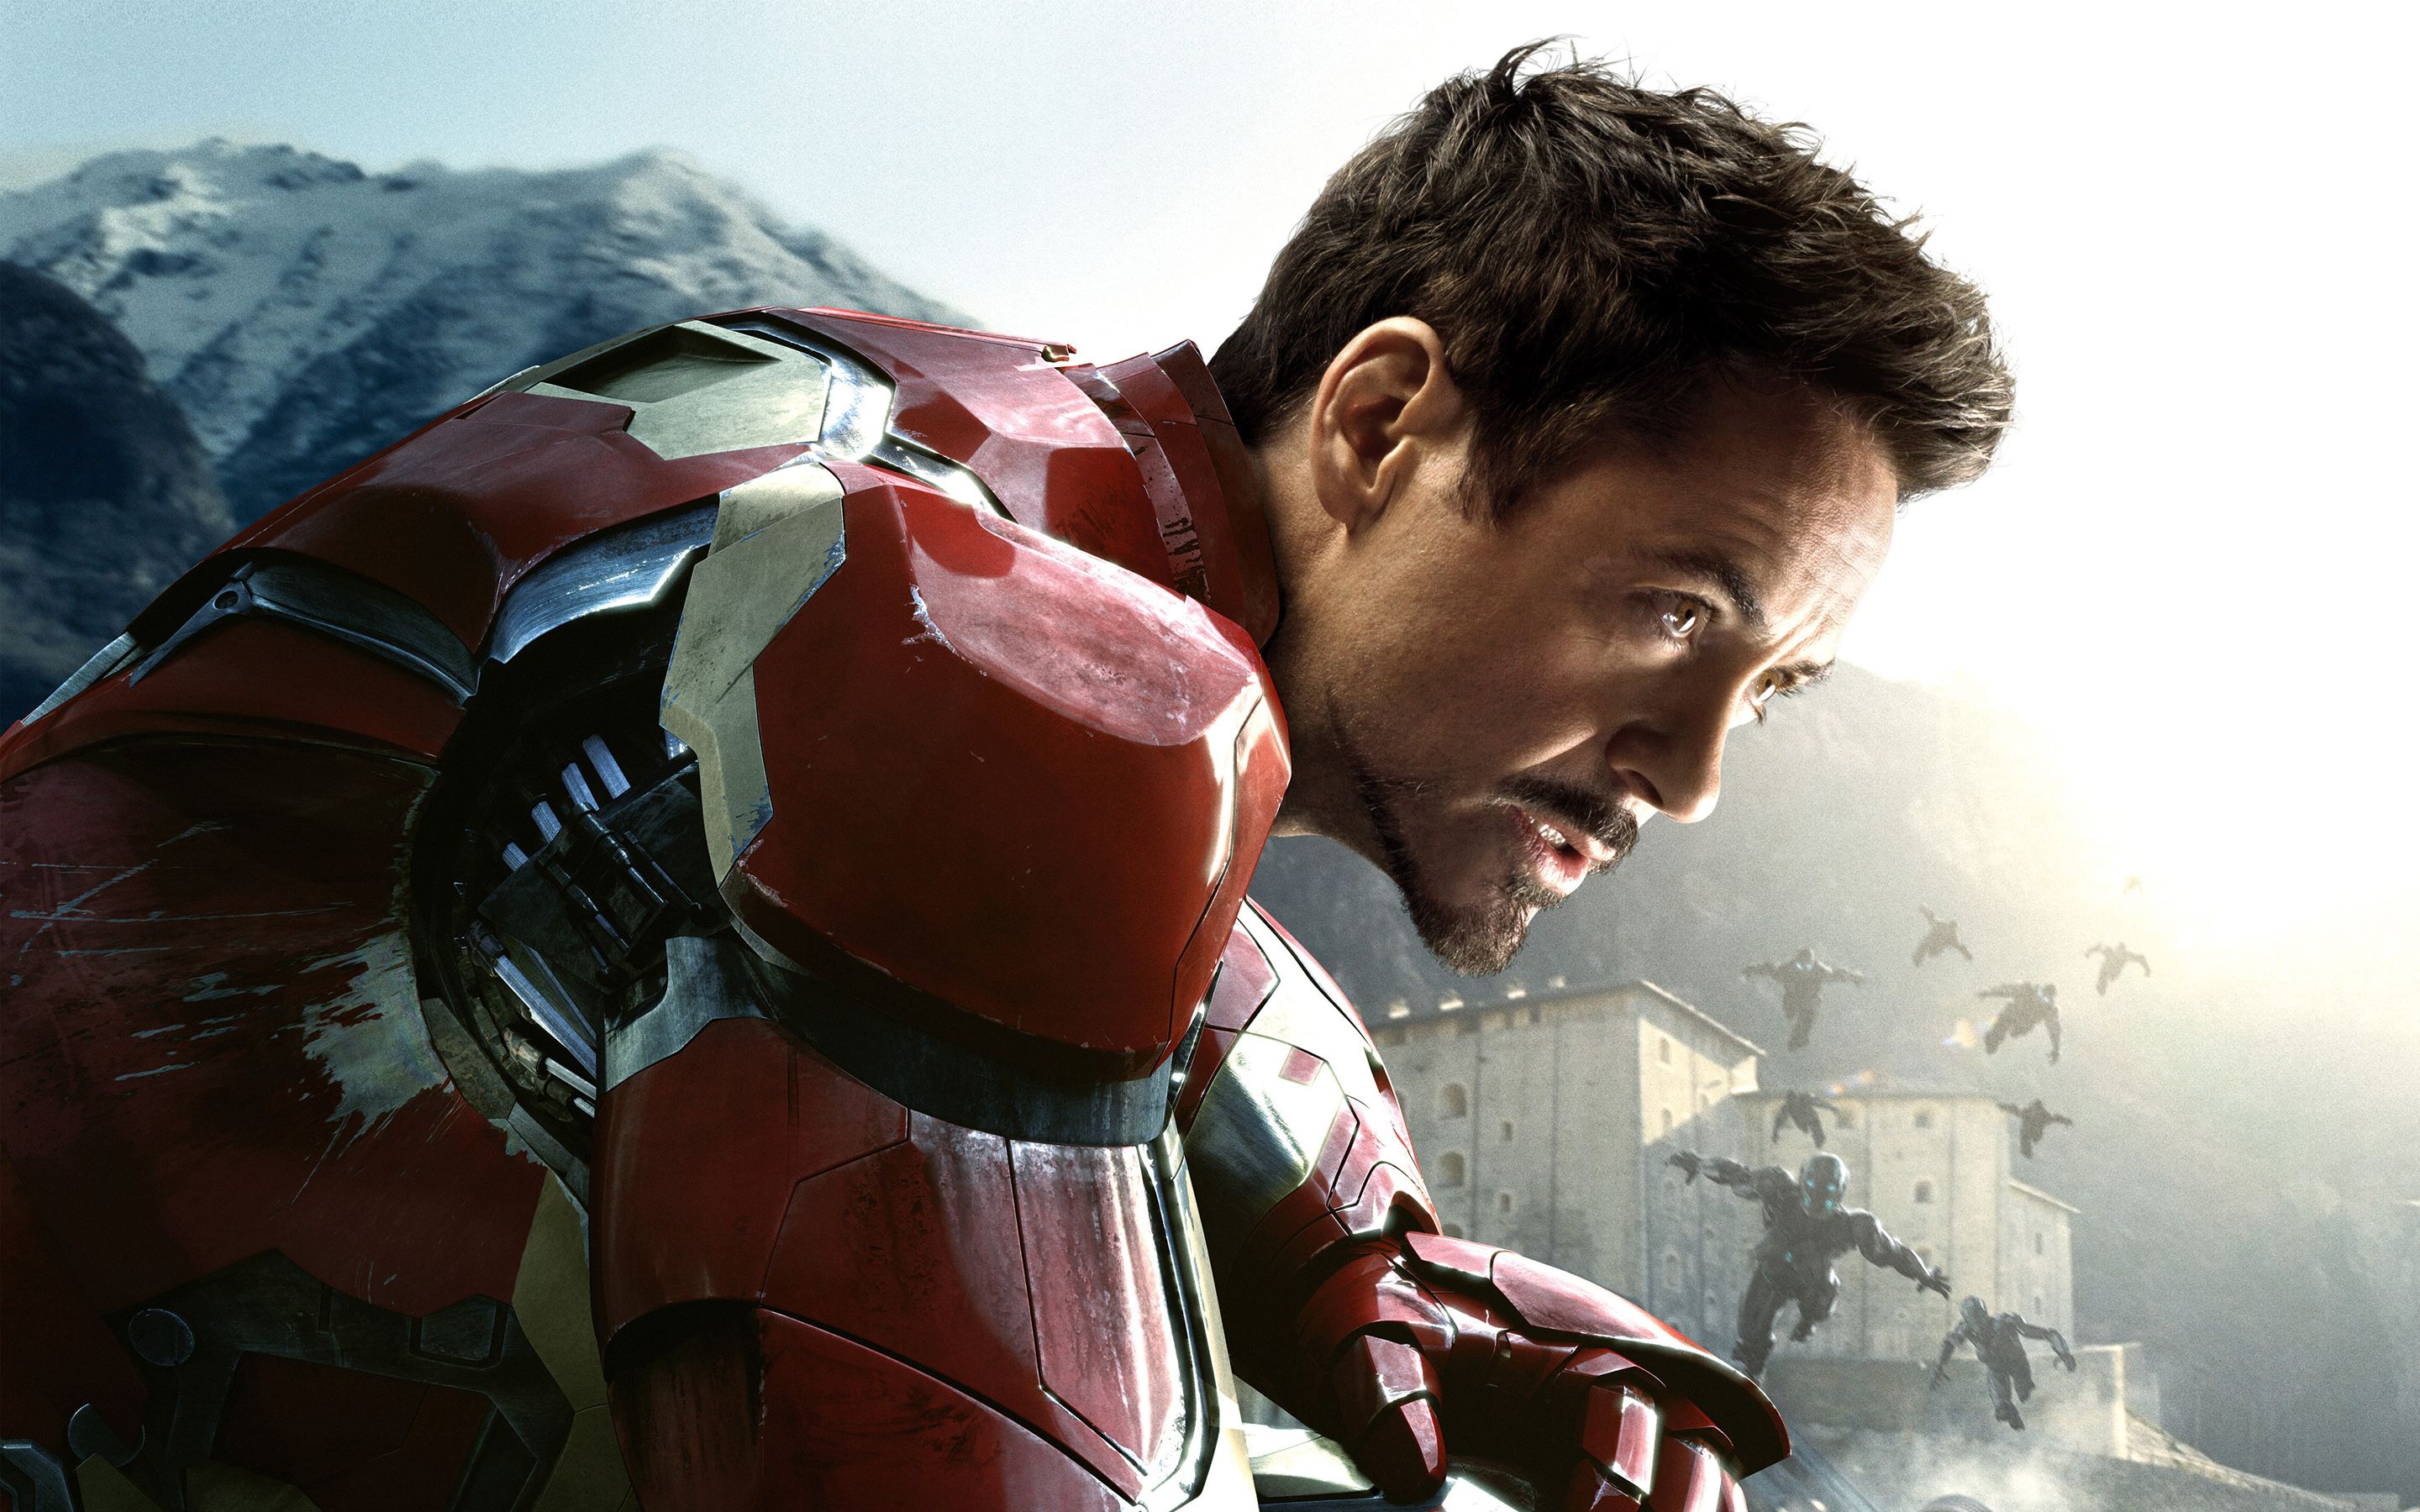 Iron Man Avengers Age of Ultron Wallpapers | HD Wallpapers